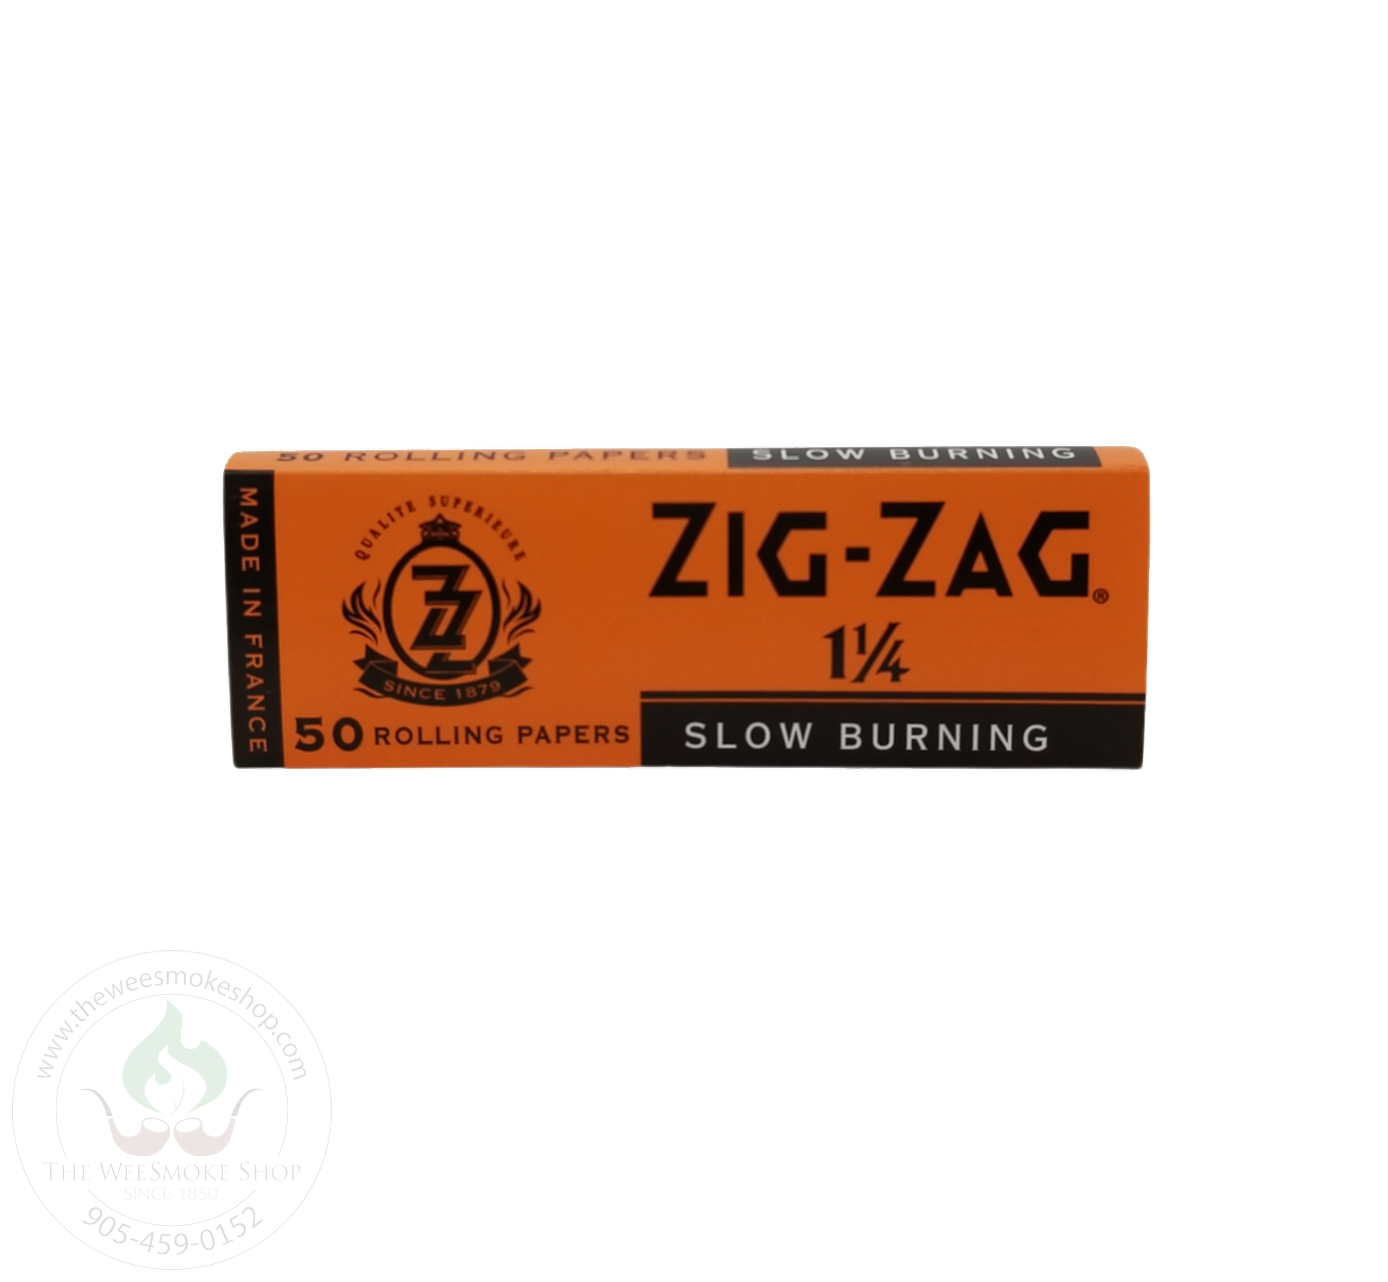 Zig Zag Orange Rolling Papers-rolling papers that are slow burning in the size 1 1/4. Pack of 50 papers.